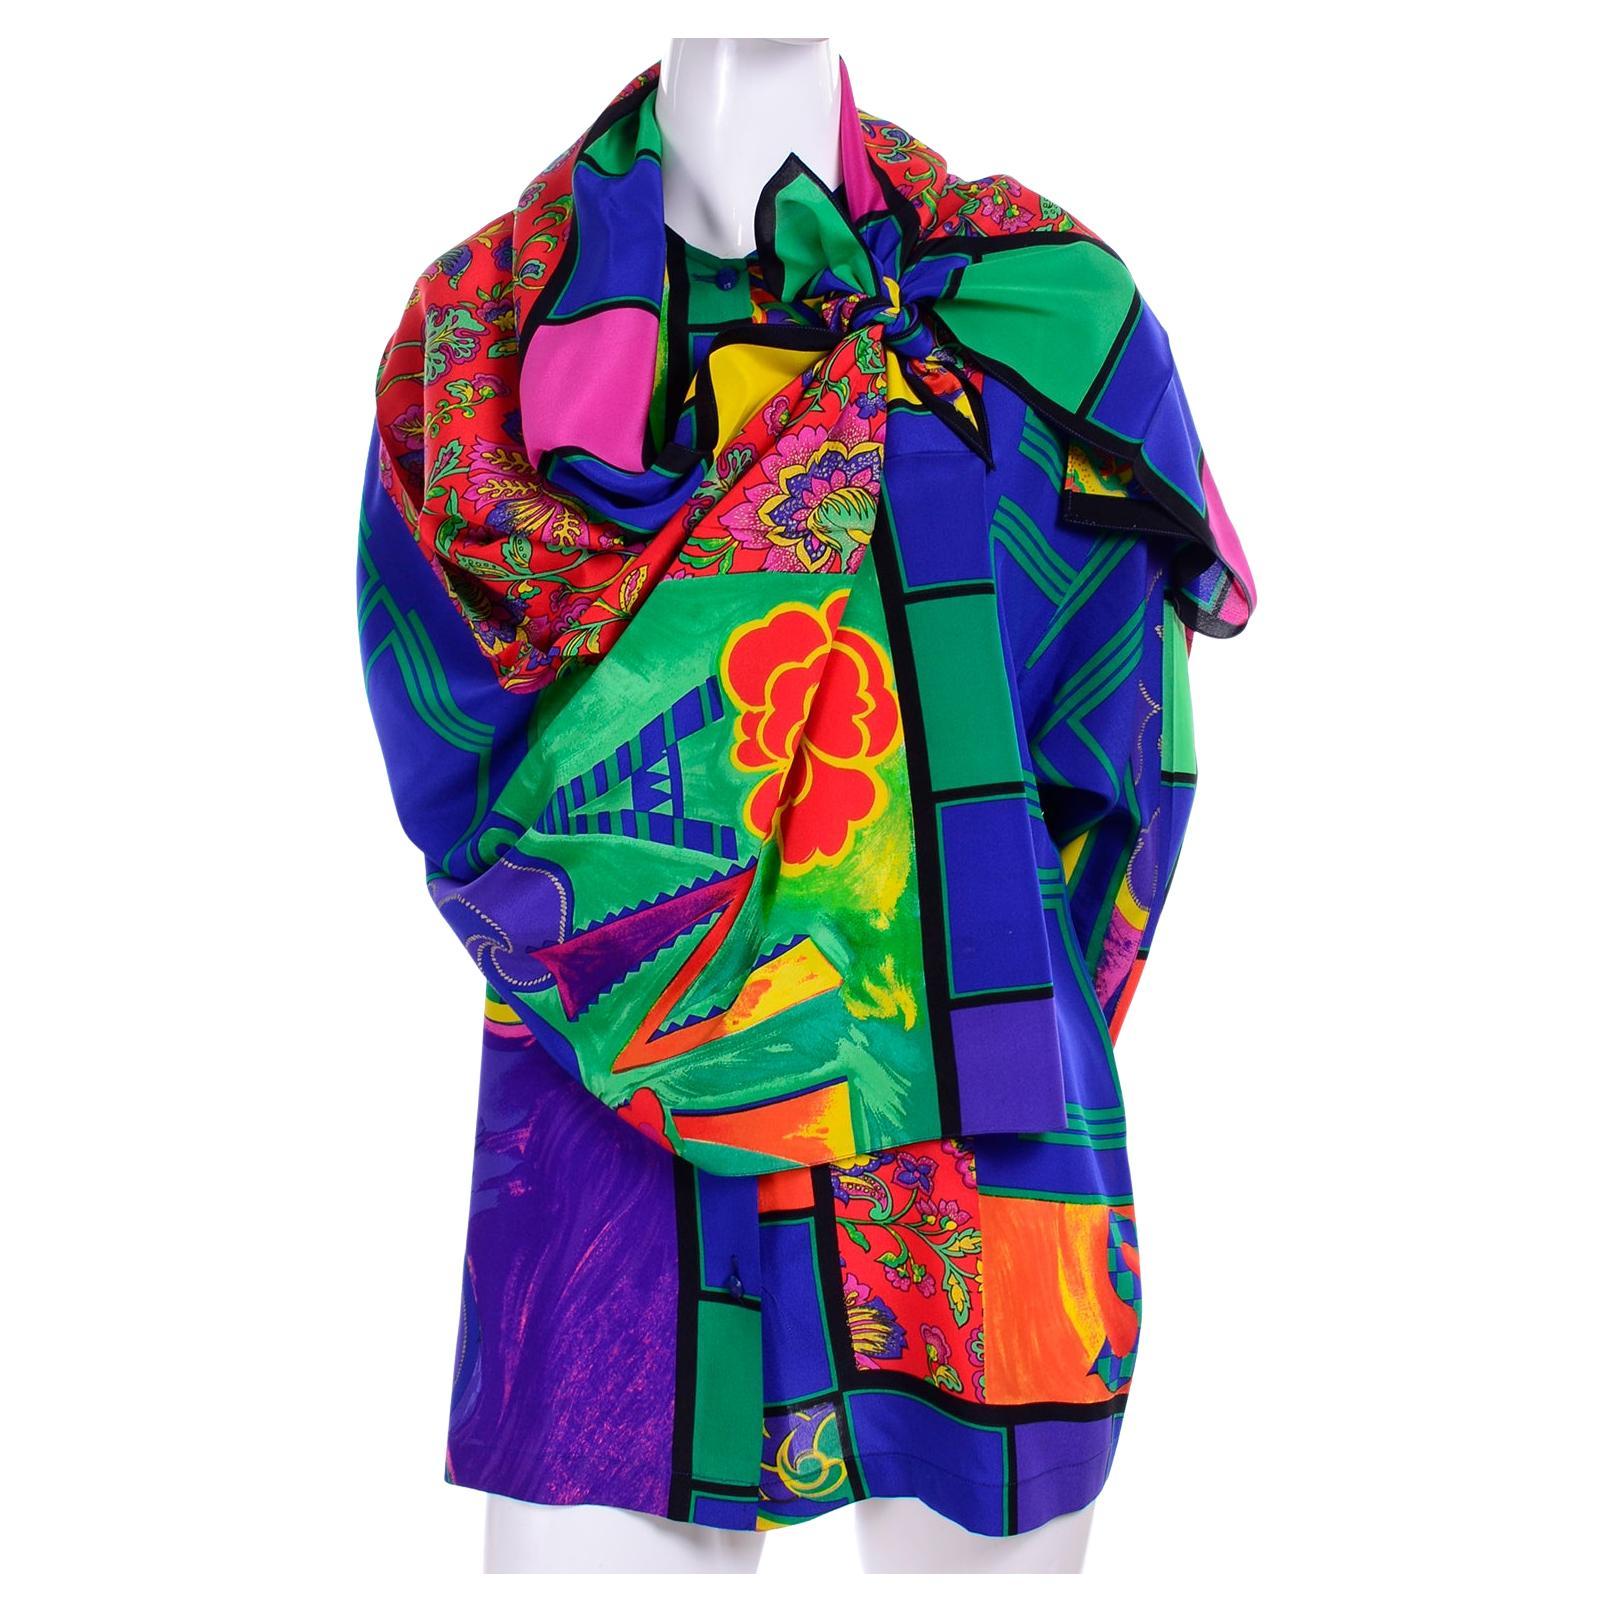 This is a late 1980's or early 1990's vintage Gianni Versace silk shirt in a beautiful mixed pattern print. The shirt comes with its oversized coordinating scarf and was designed by Gianni Versace . The botanical print is in vibrant shades of blue,